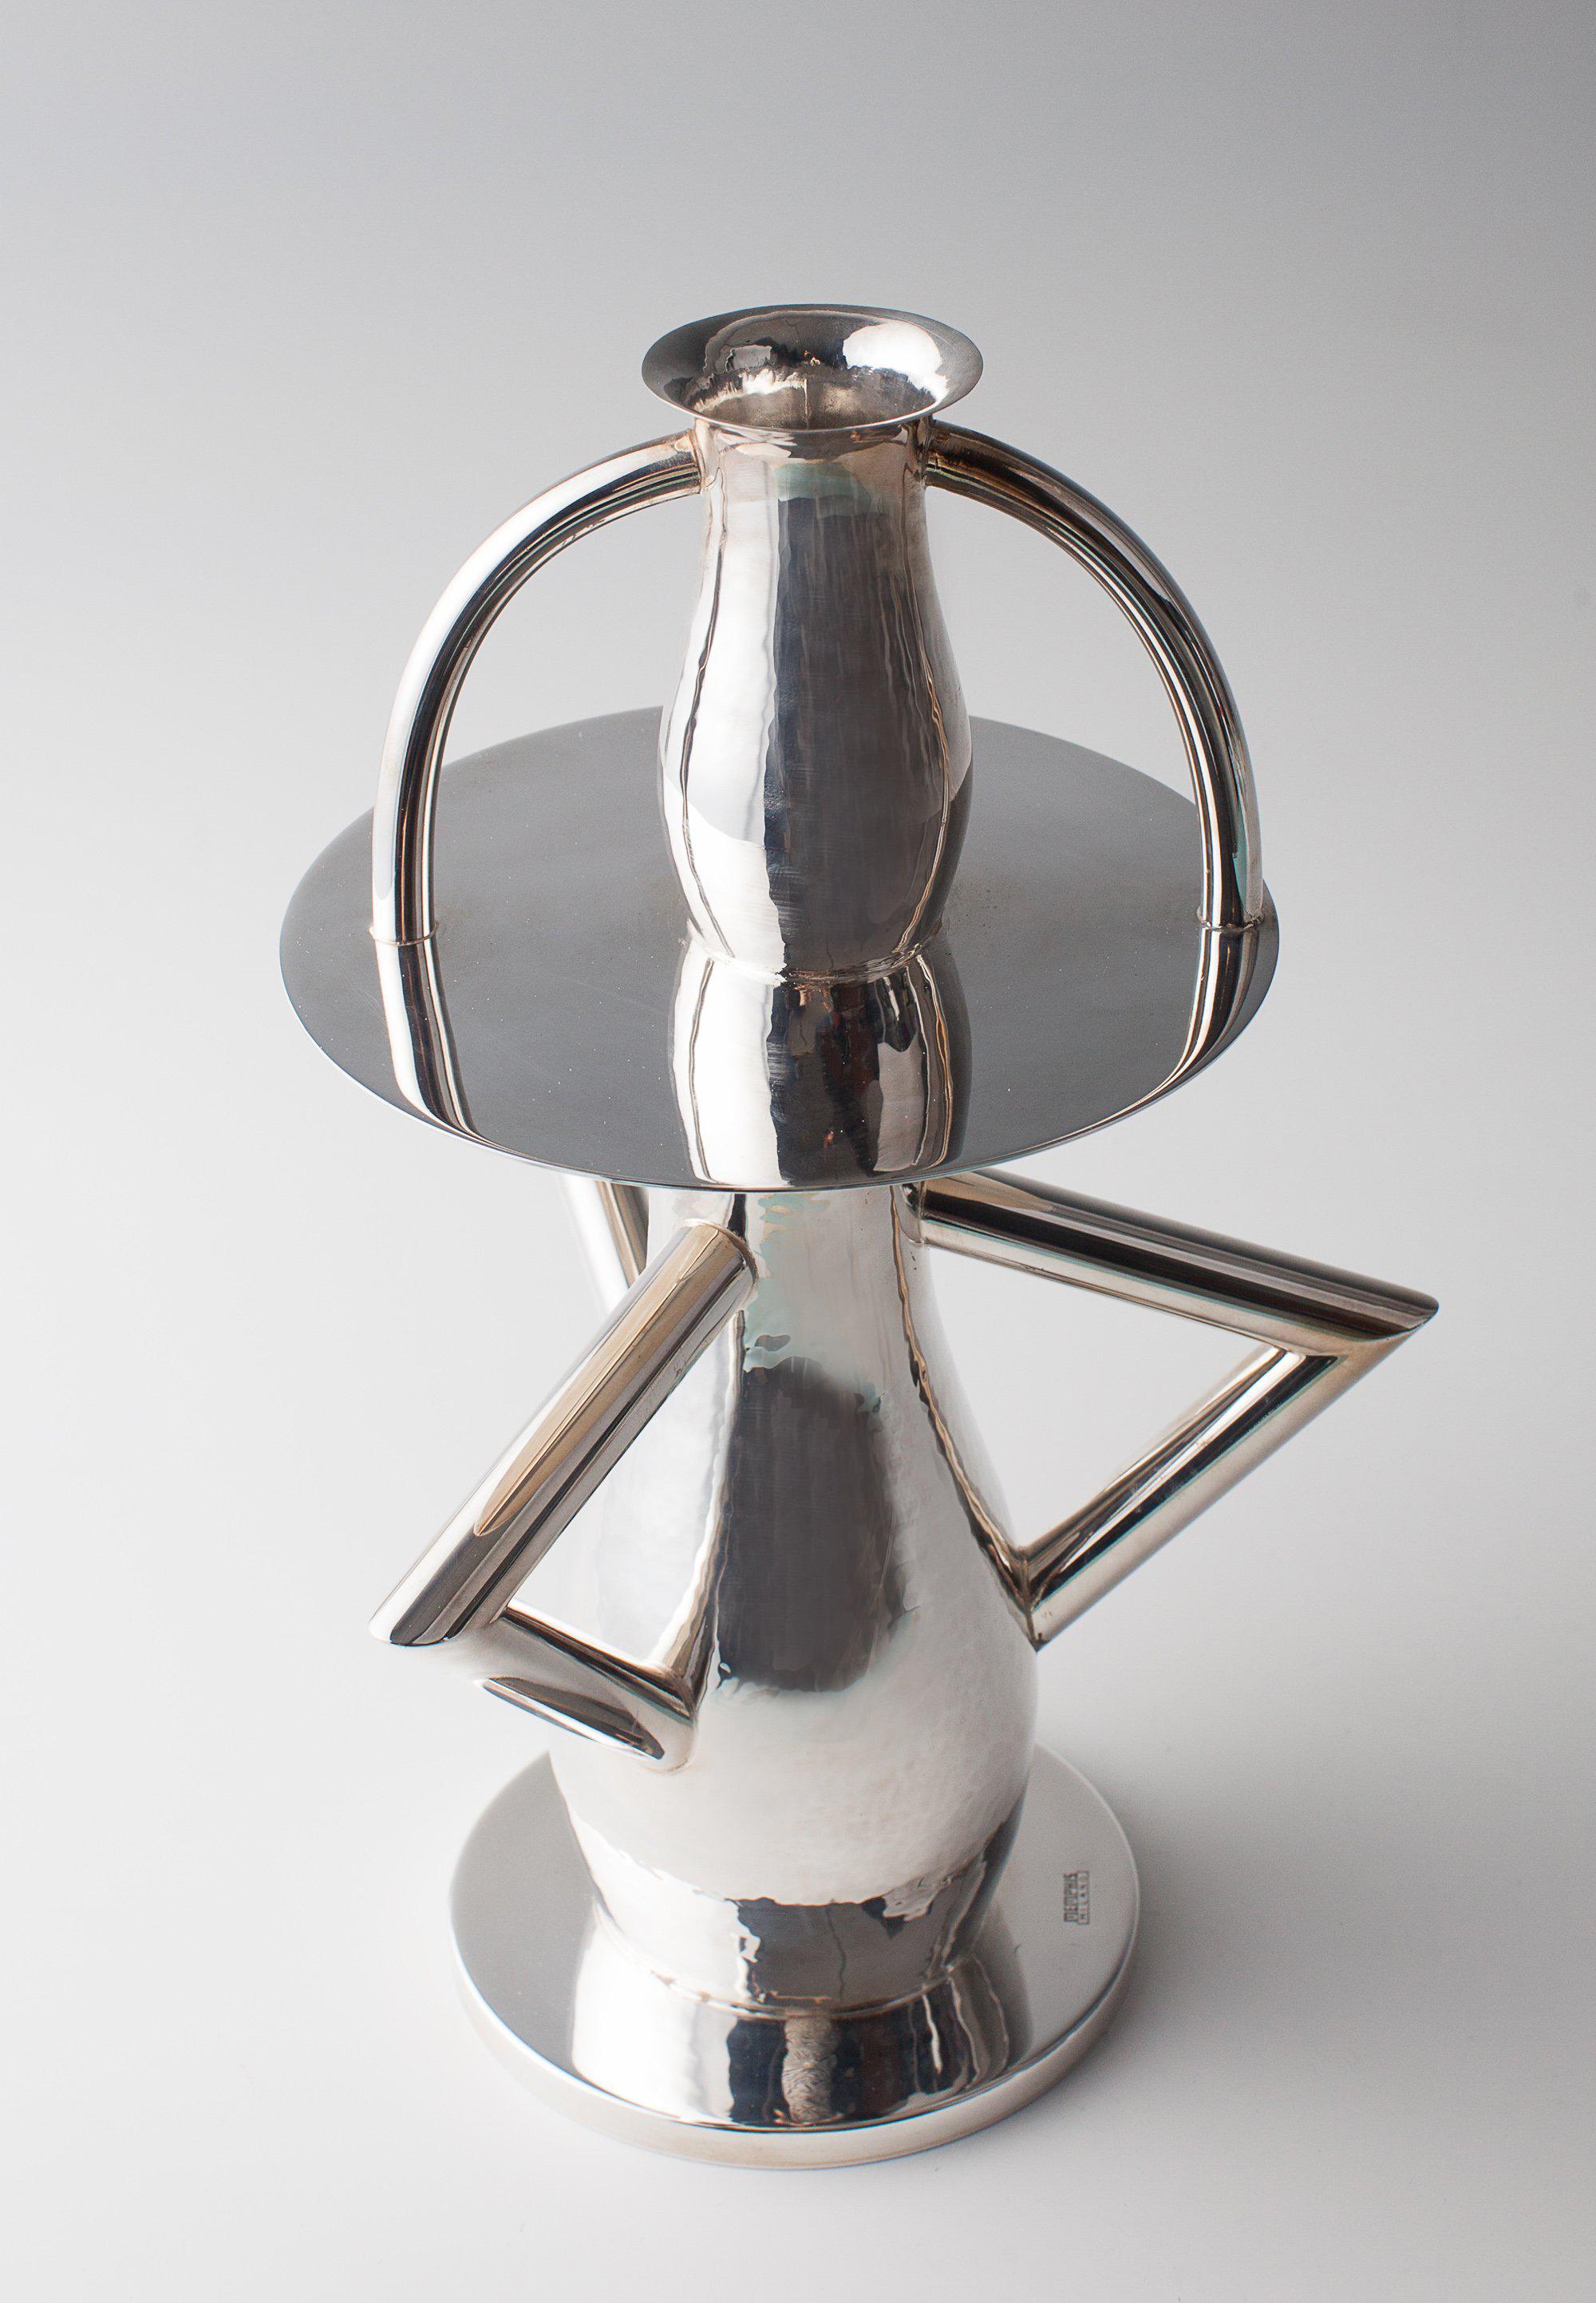 The Alaska is a flower vase in silver brass.
It is one of the first designs produced by Sottsass for Memphis in 1982.
Measures: H. 30 cm.
Executed by Rossi e Arcandi, Monticello Conte Otto, Vicenza for Memphis, Milan. Brass, asymmetric several